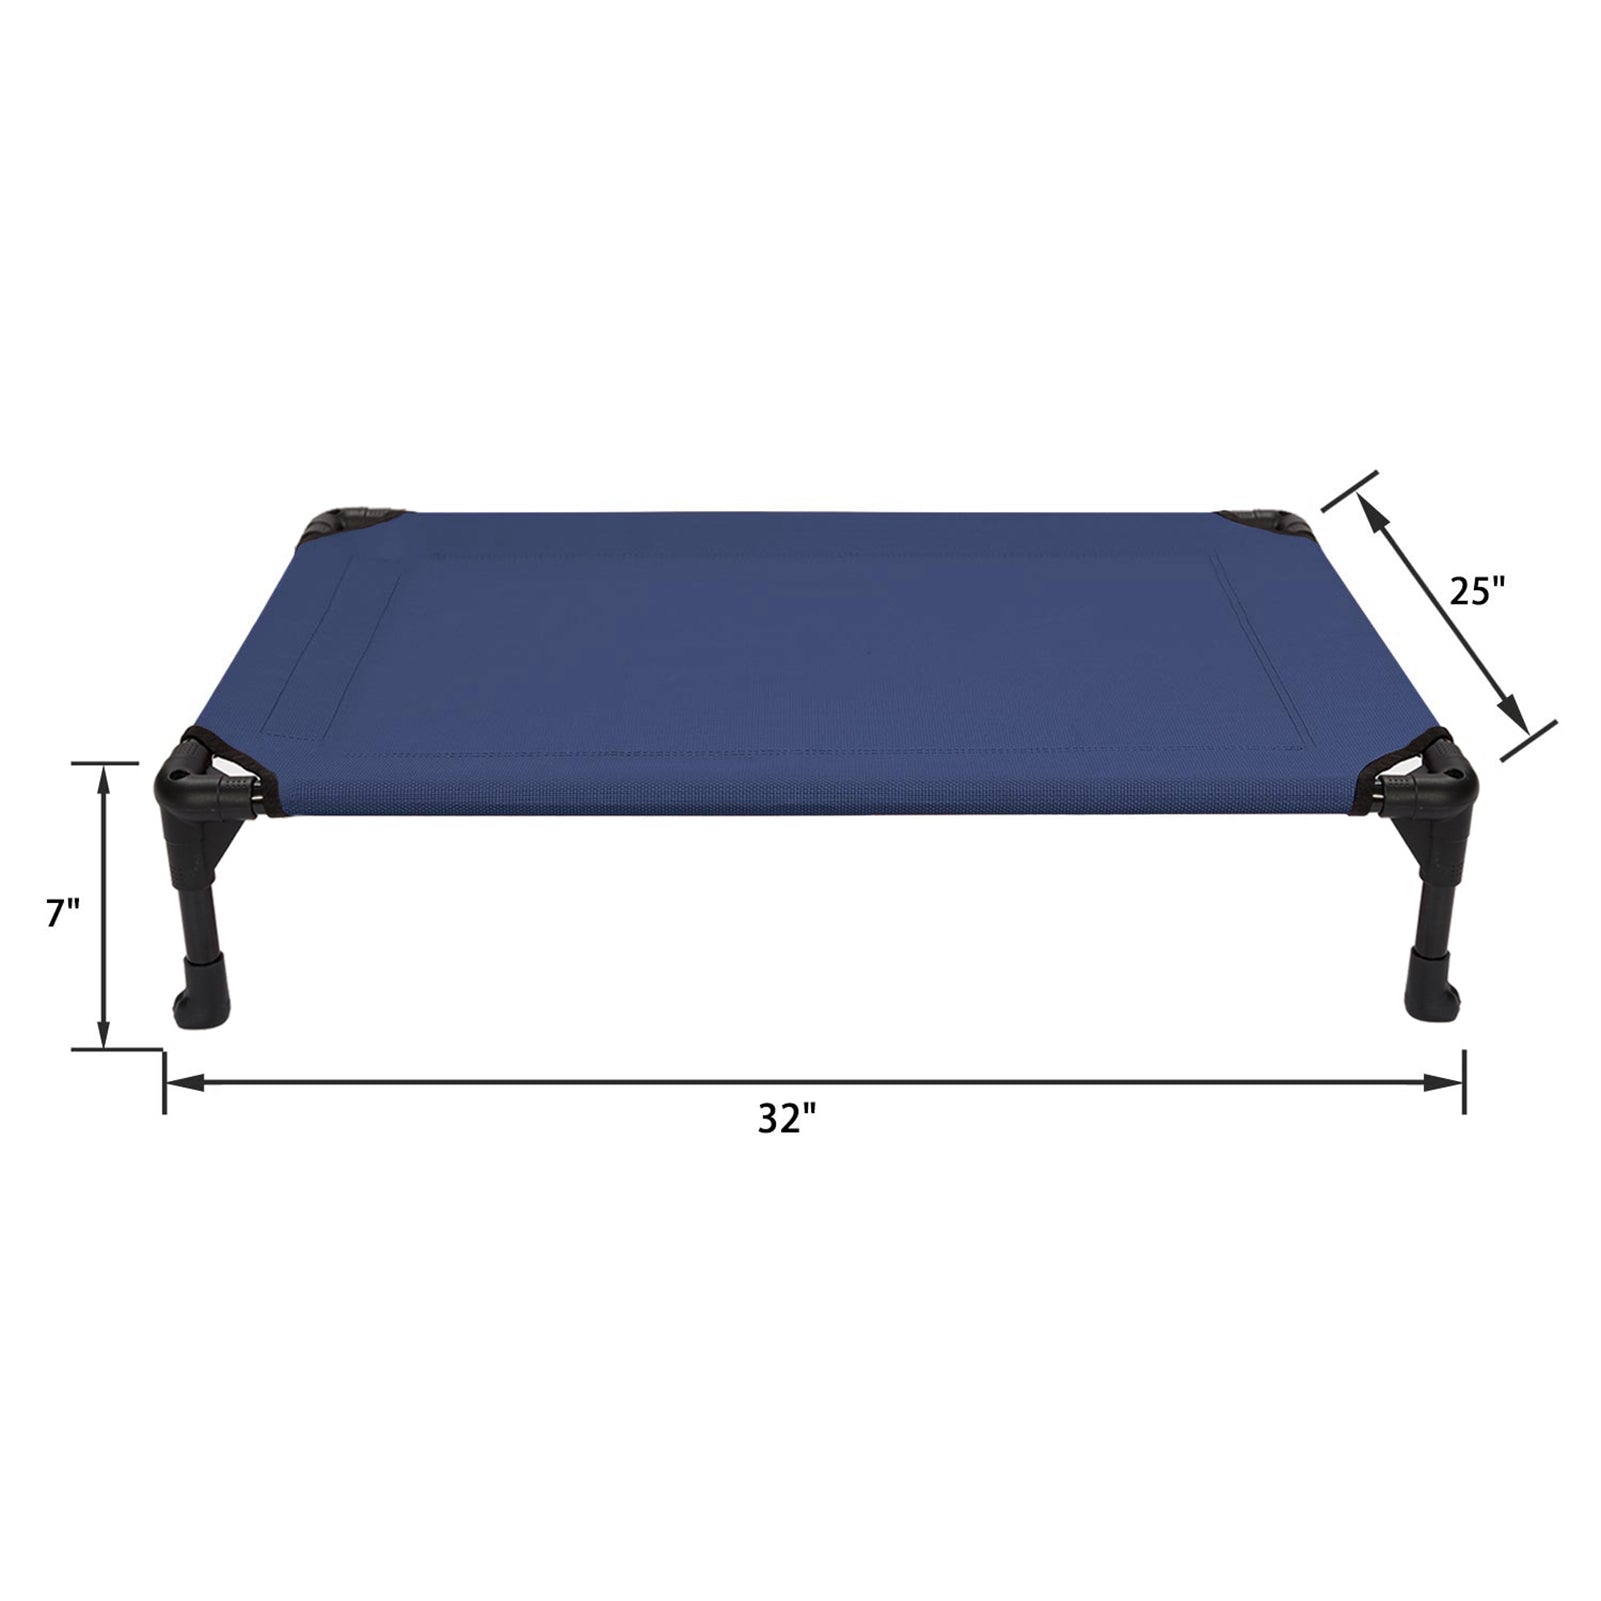 Veehoo Cooling Elevated Dog Bed， Portable Raised Pet Cot with Washable Mesh， Medium， Blue